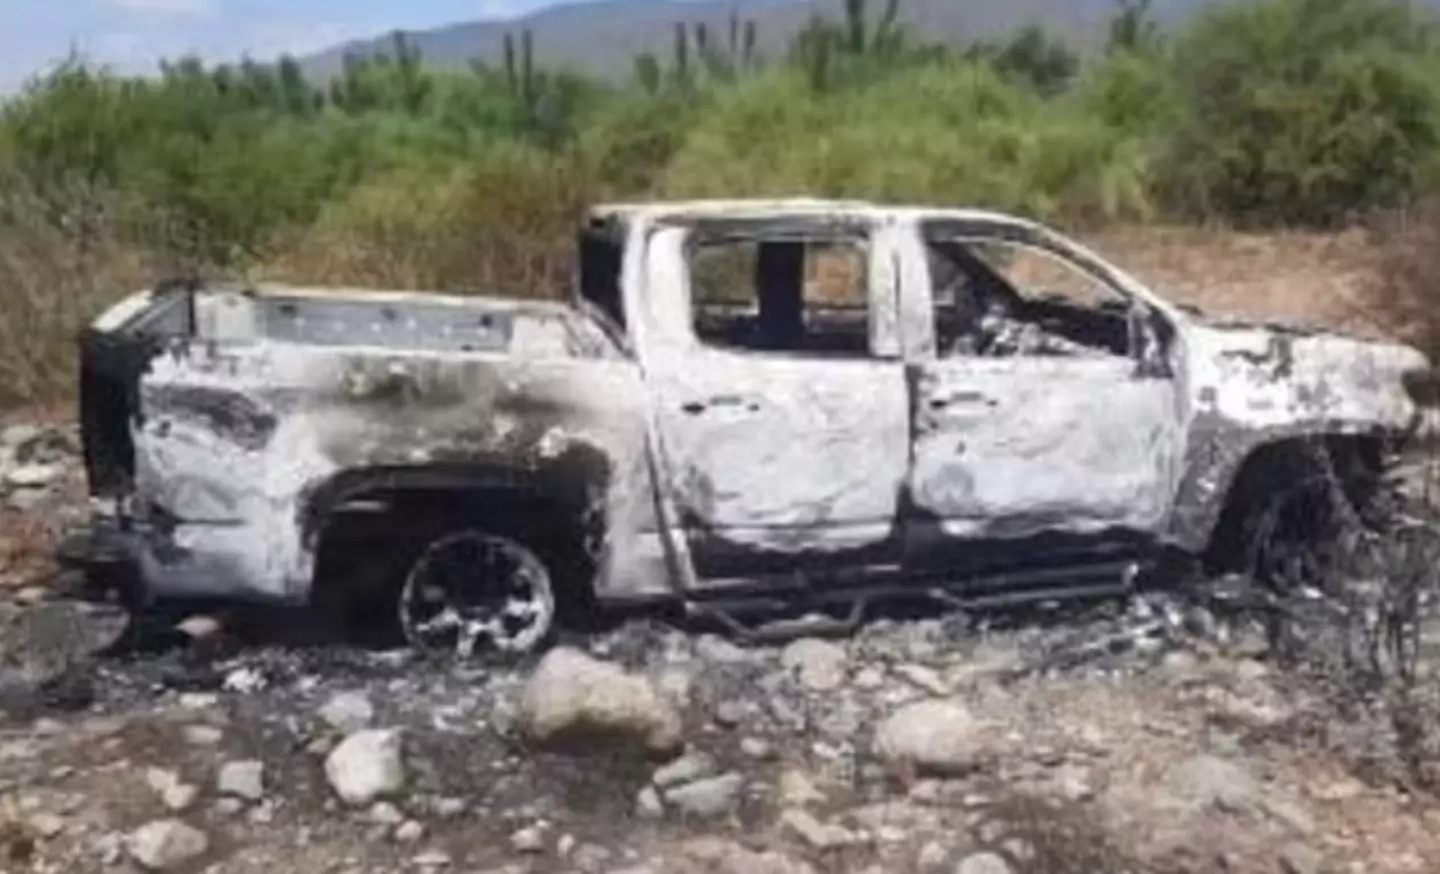 A vehicle linked to the tourists was found burned-out. (9News)